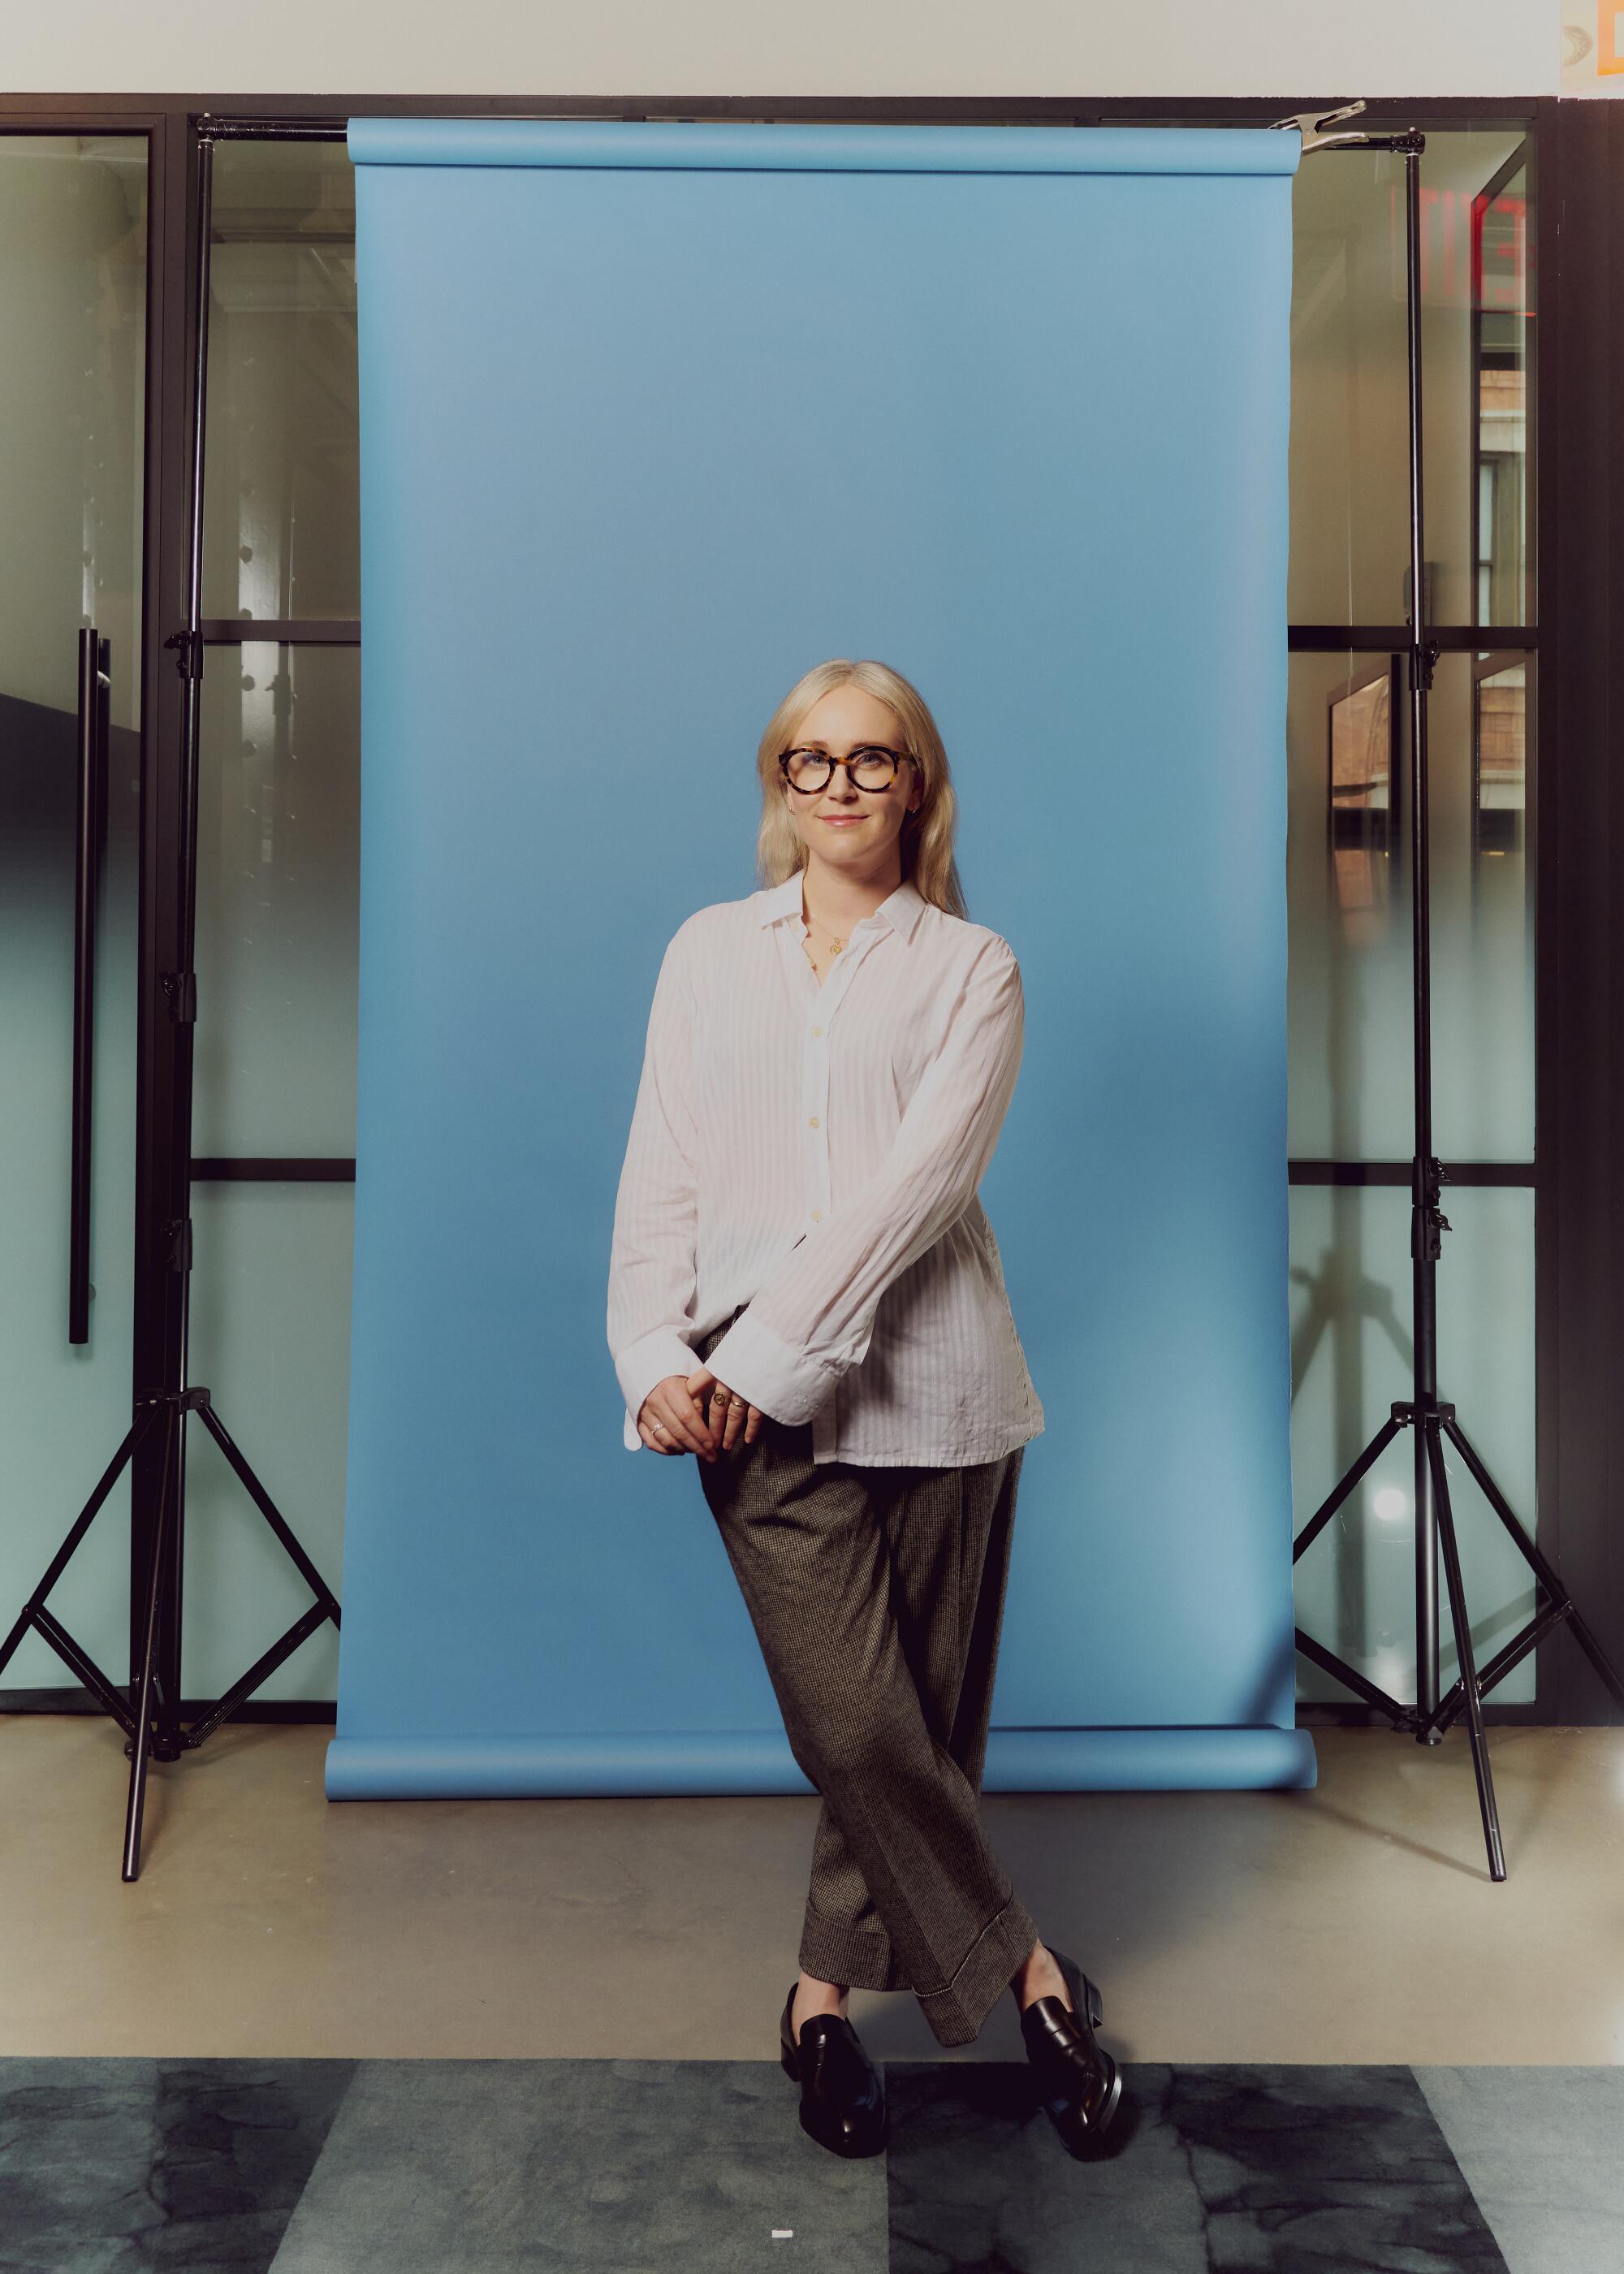 A blond woman wearing glasses, a white button-down shirt and gray trousers, poses in front of a sky blue backdrop. 